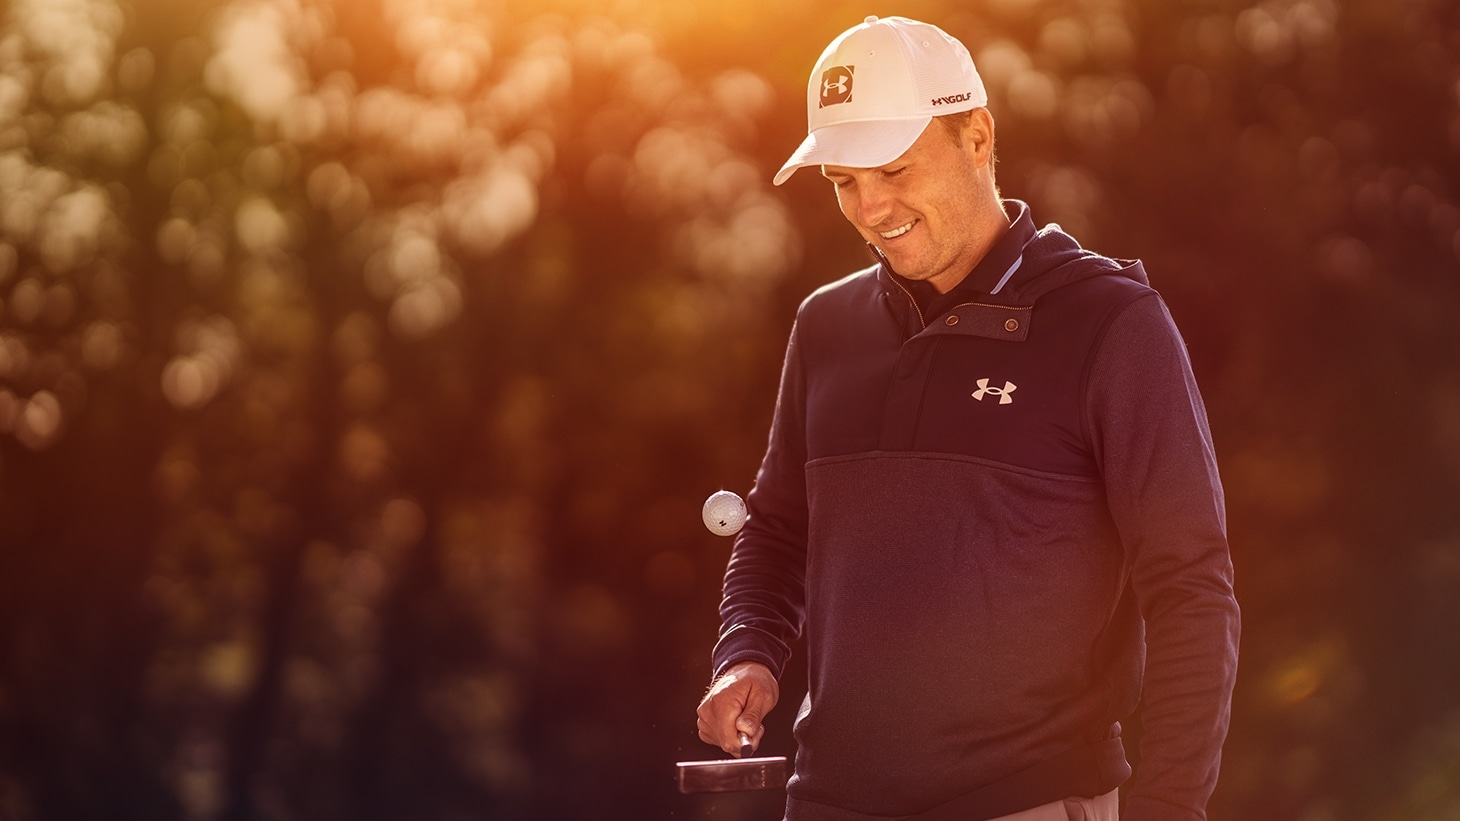 Jordan Spieth reacts to soft feel of the new Pro V1x golf ball